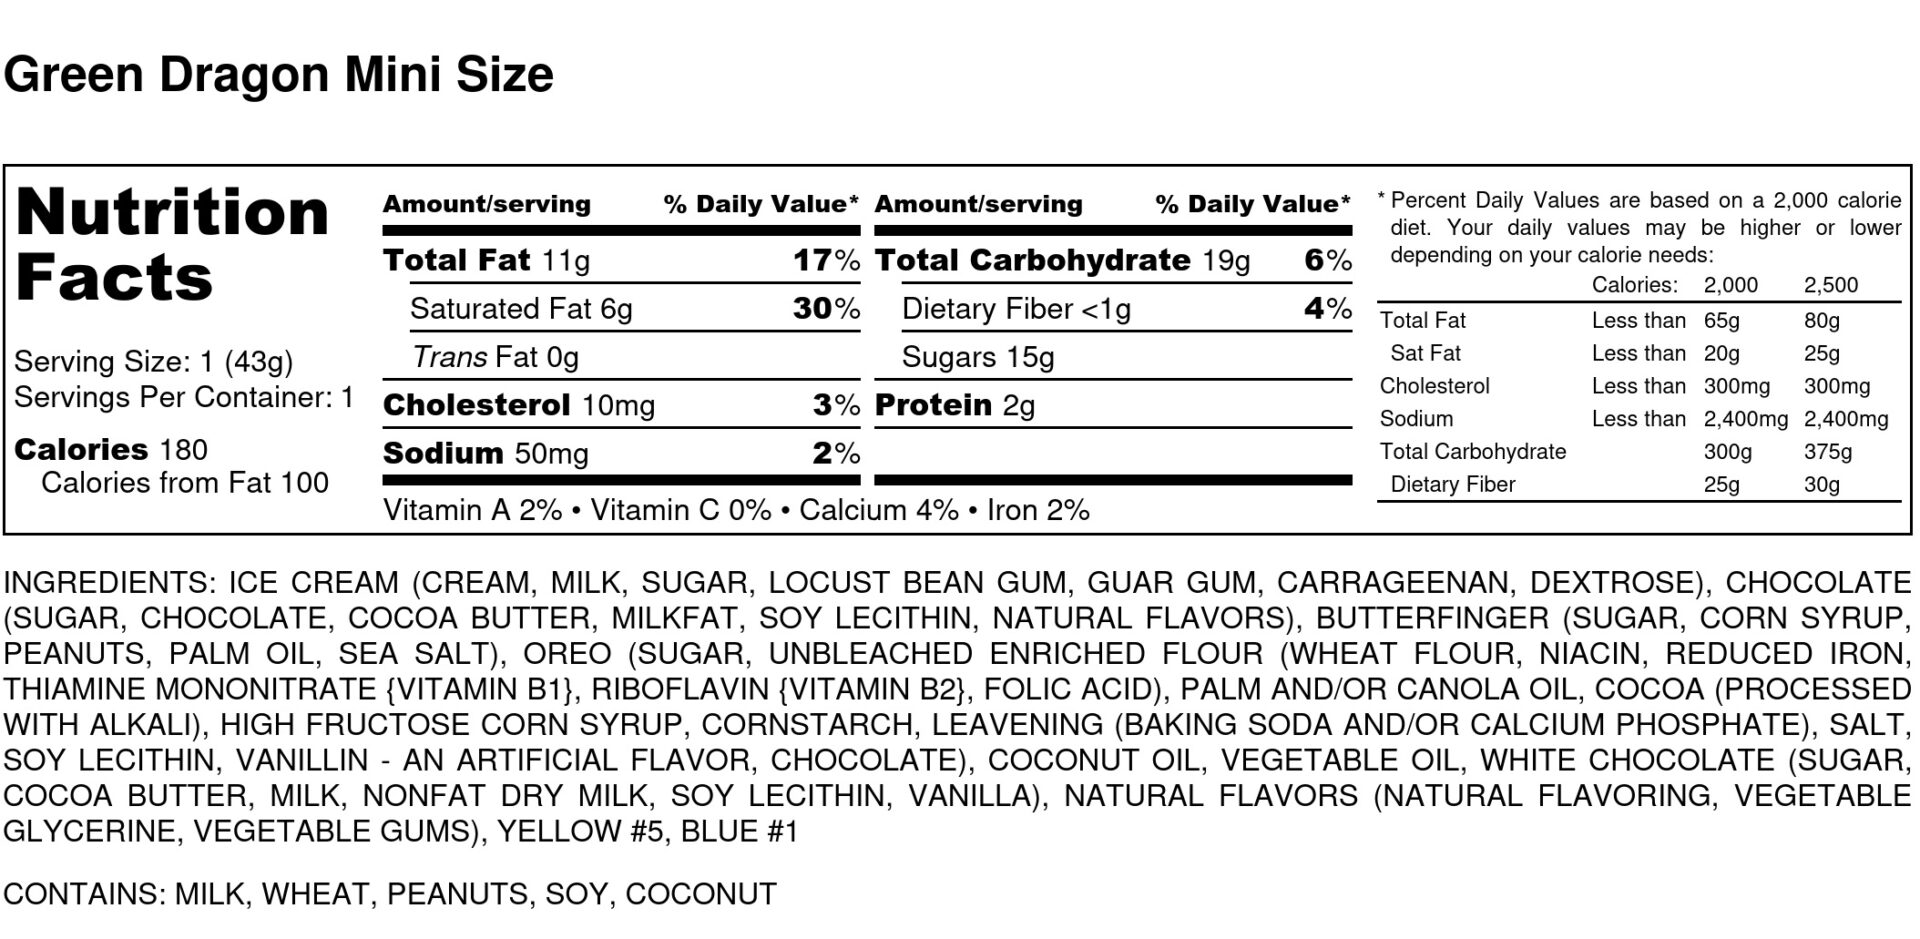 Green Dragon Mini Size Nutrition Label 1 scaled